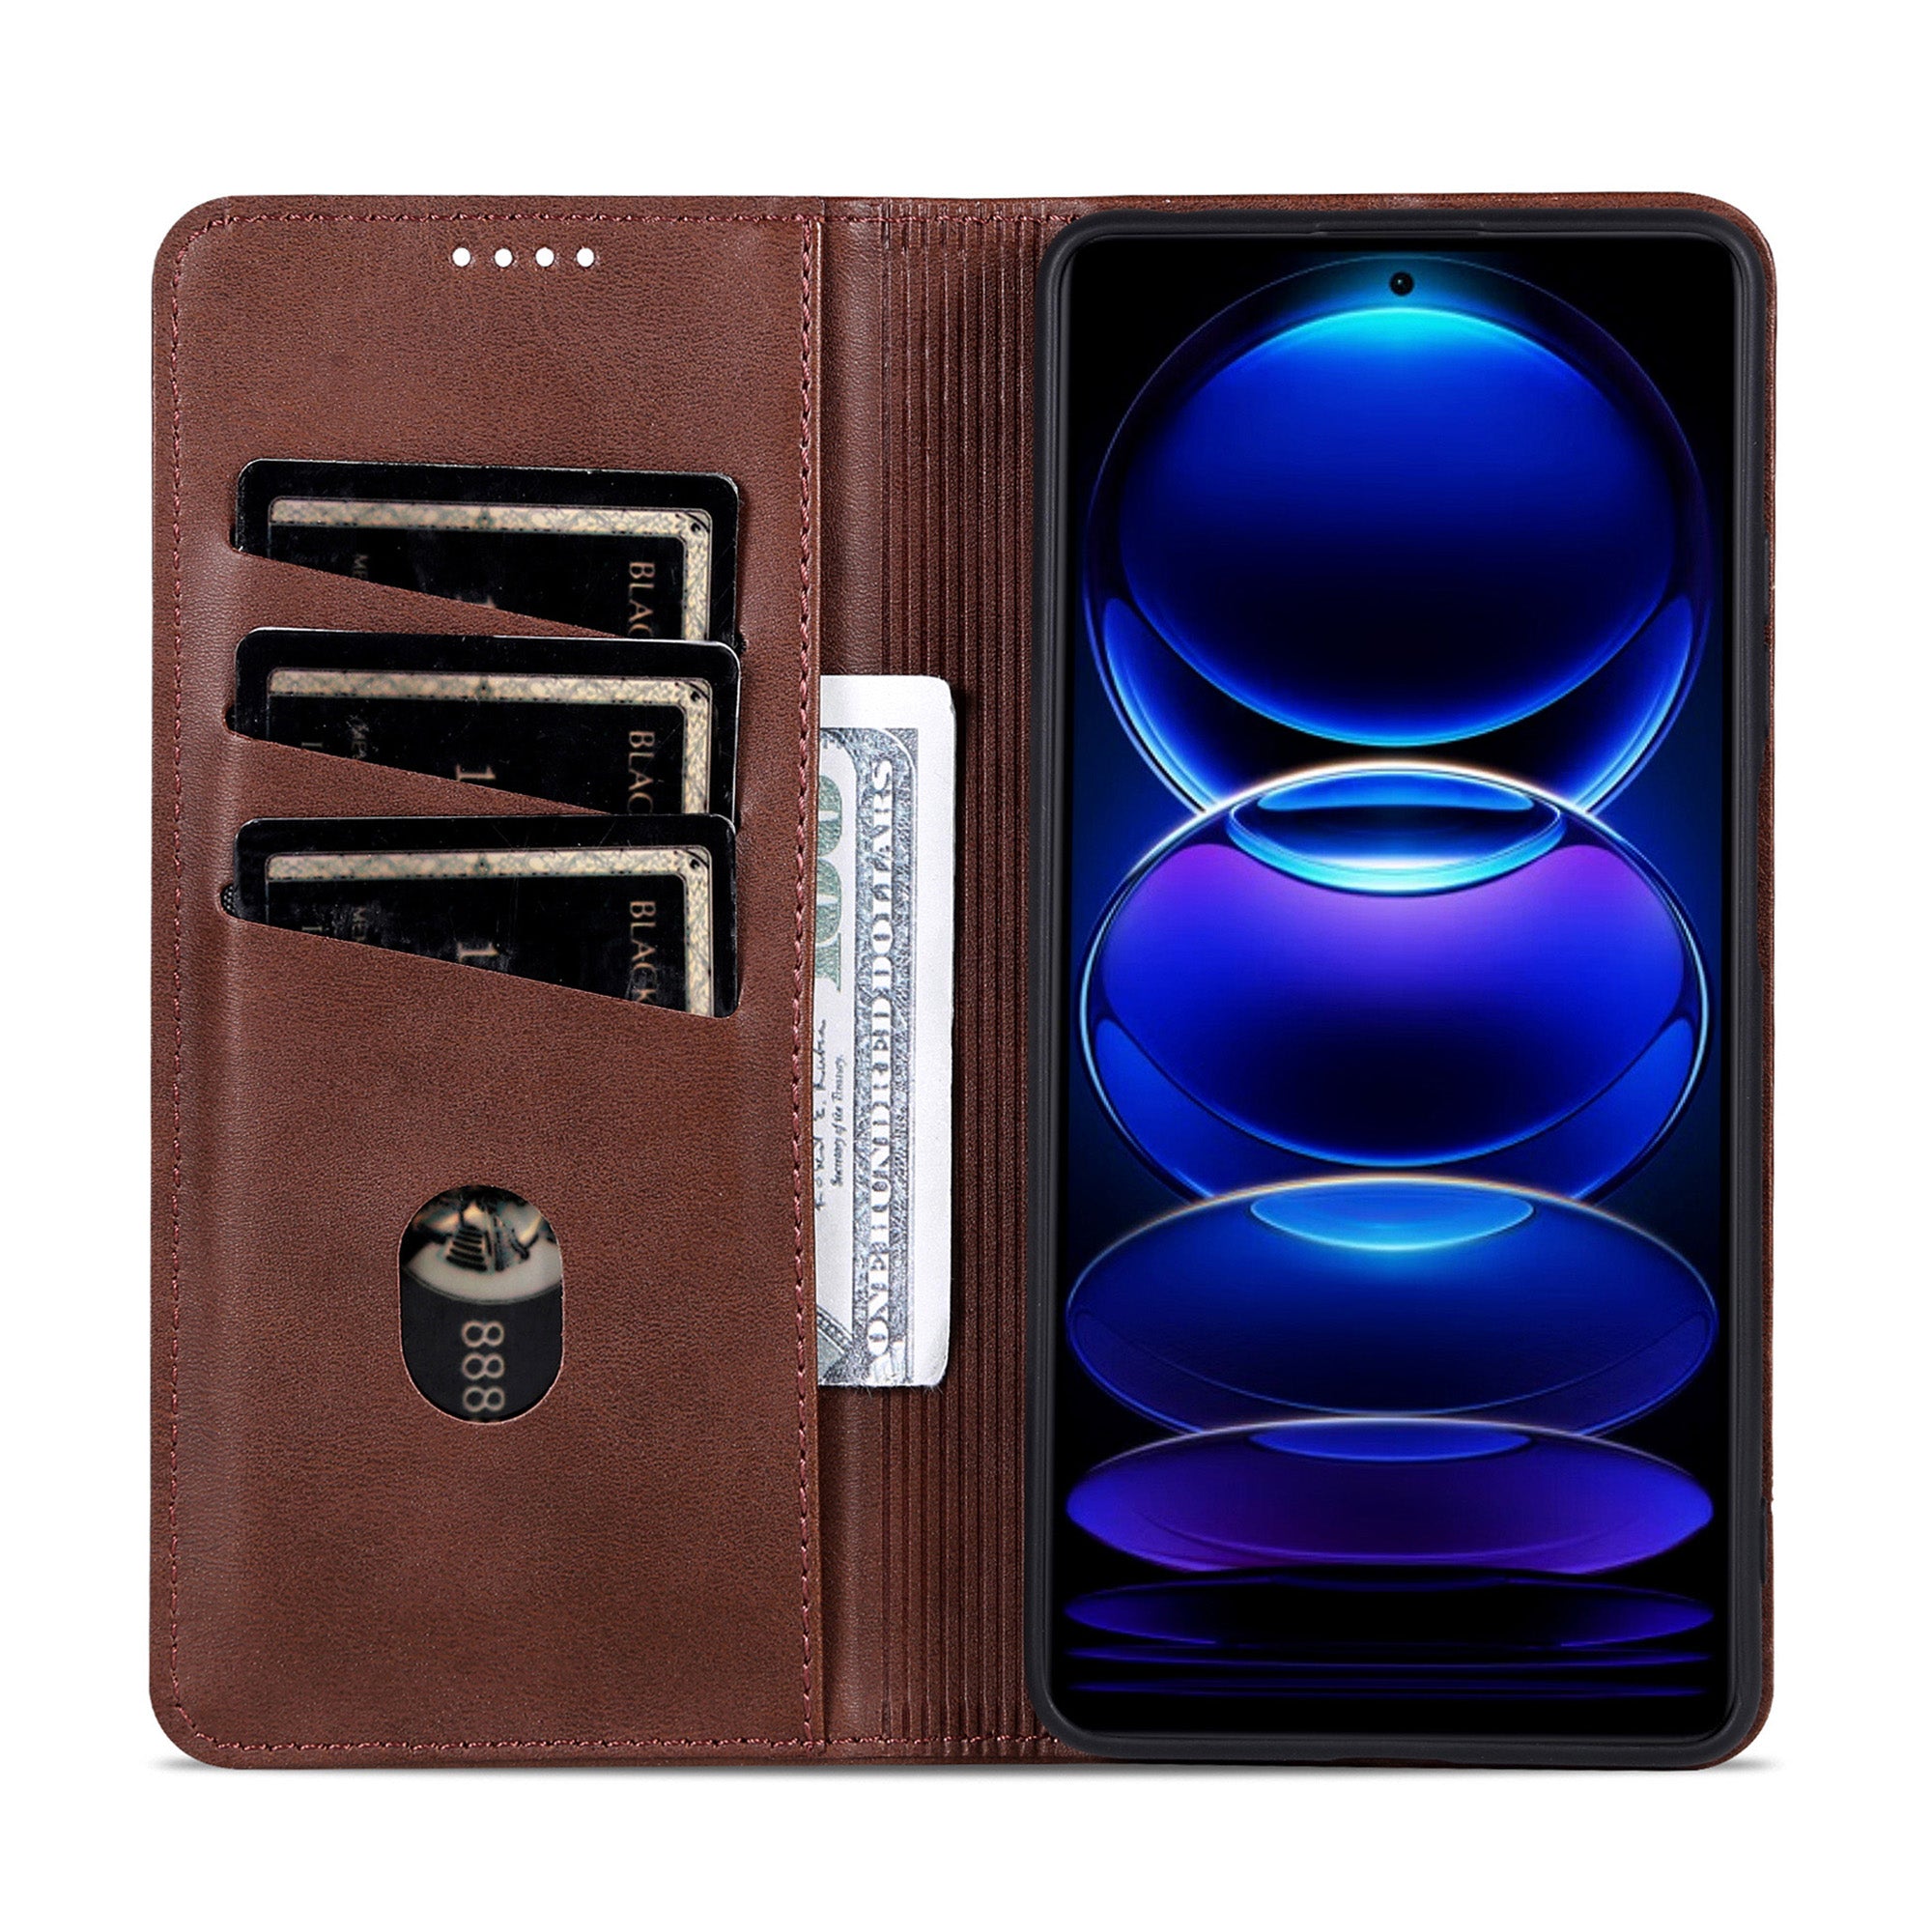 AZNS For Huawei nova 12i 4G / Enjoy 70 Pro Case Leather Cowhide Texture Wallet Phone Cover - Coffee